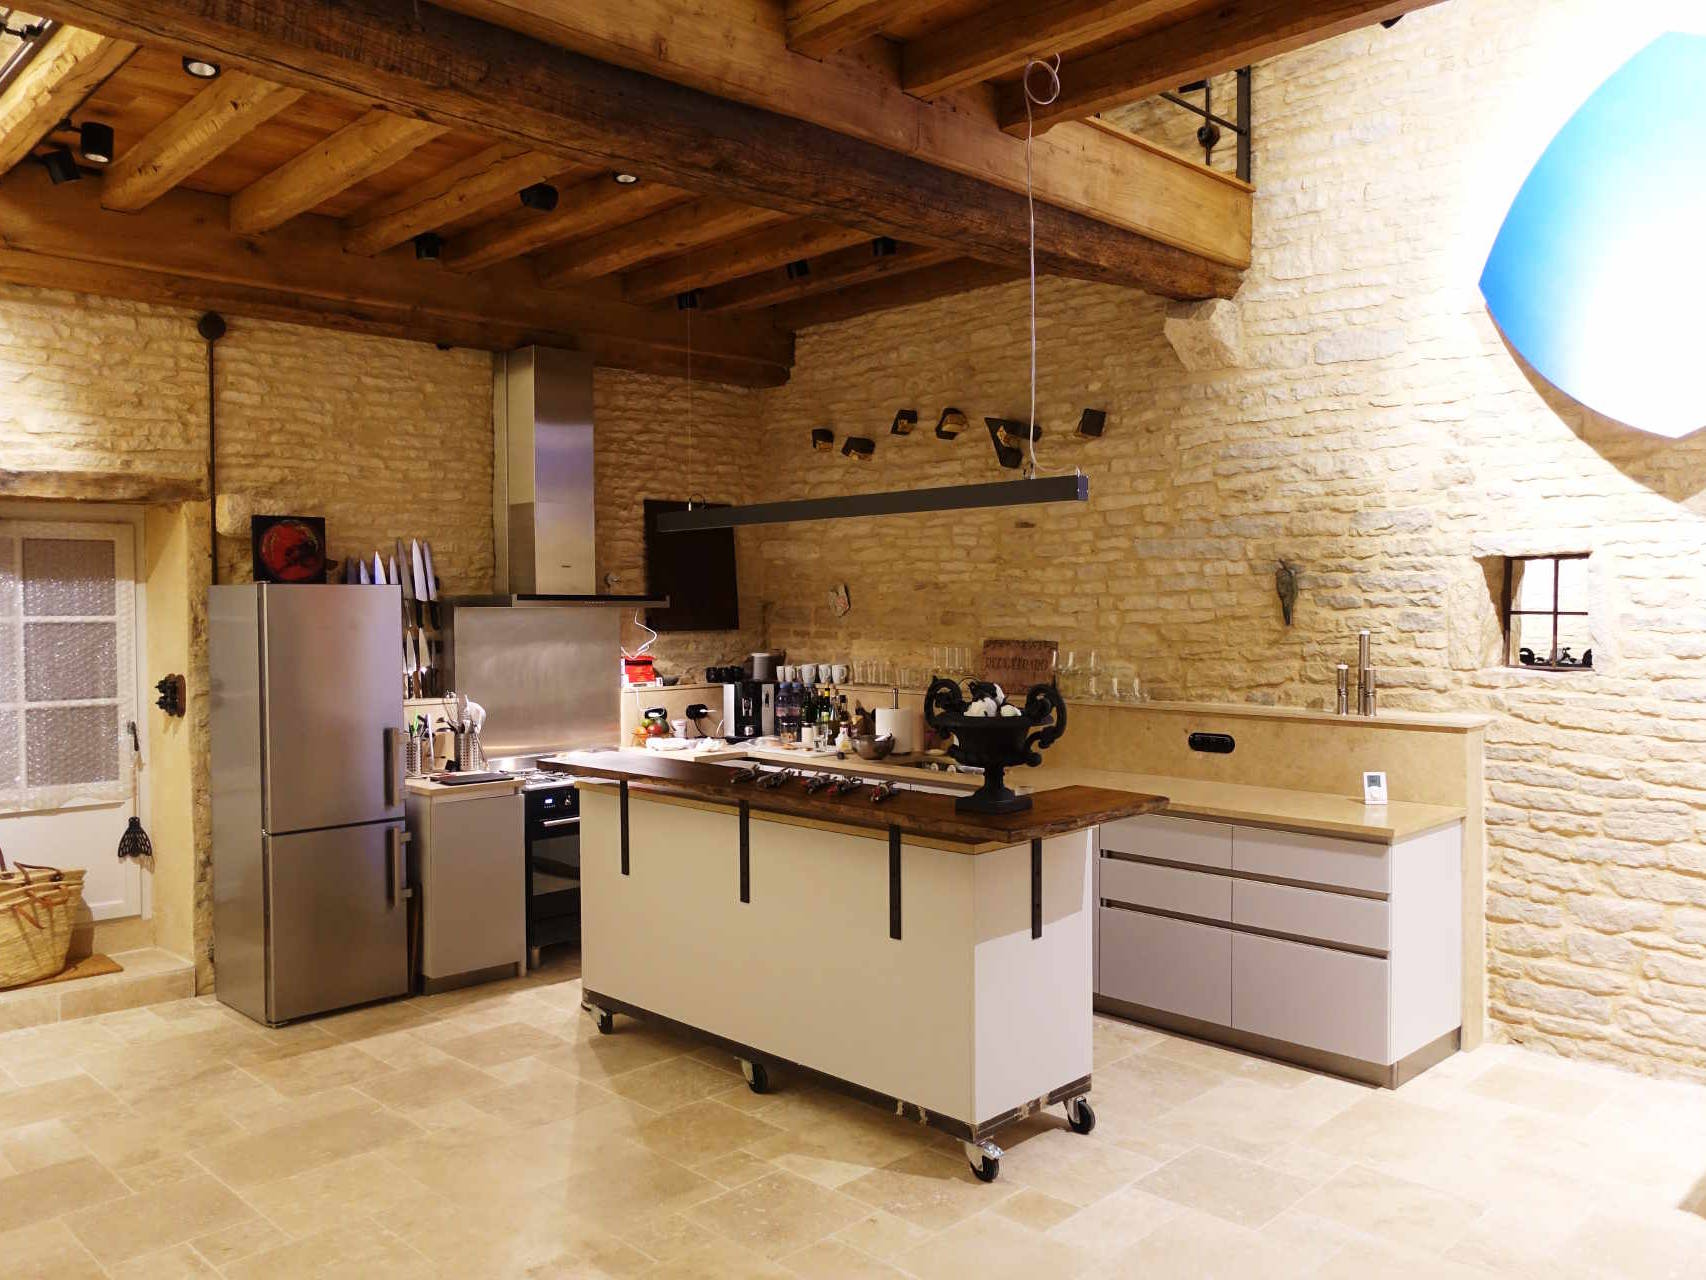 15th century barn conversion view of kitchen